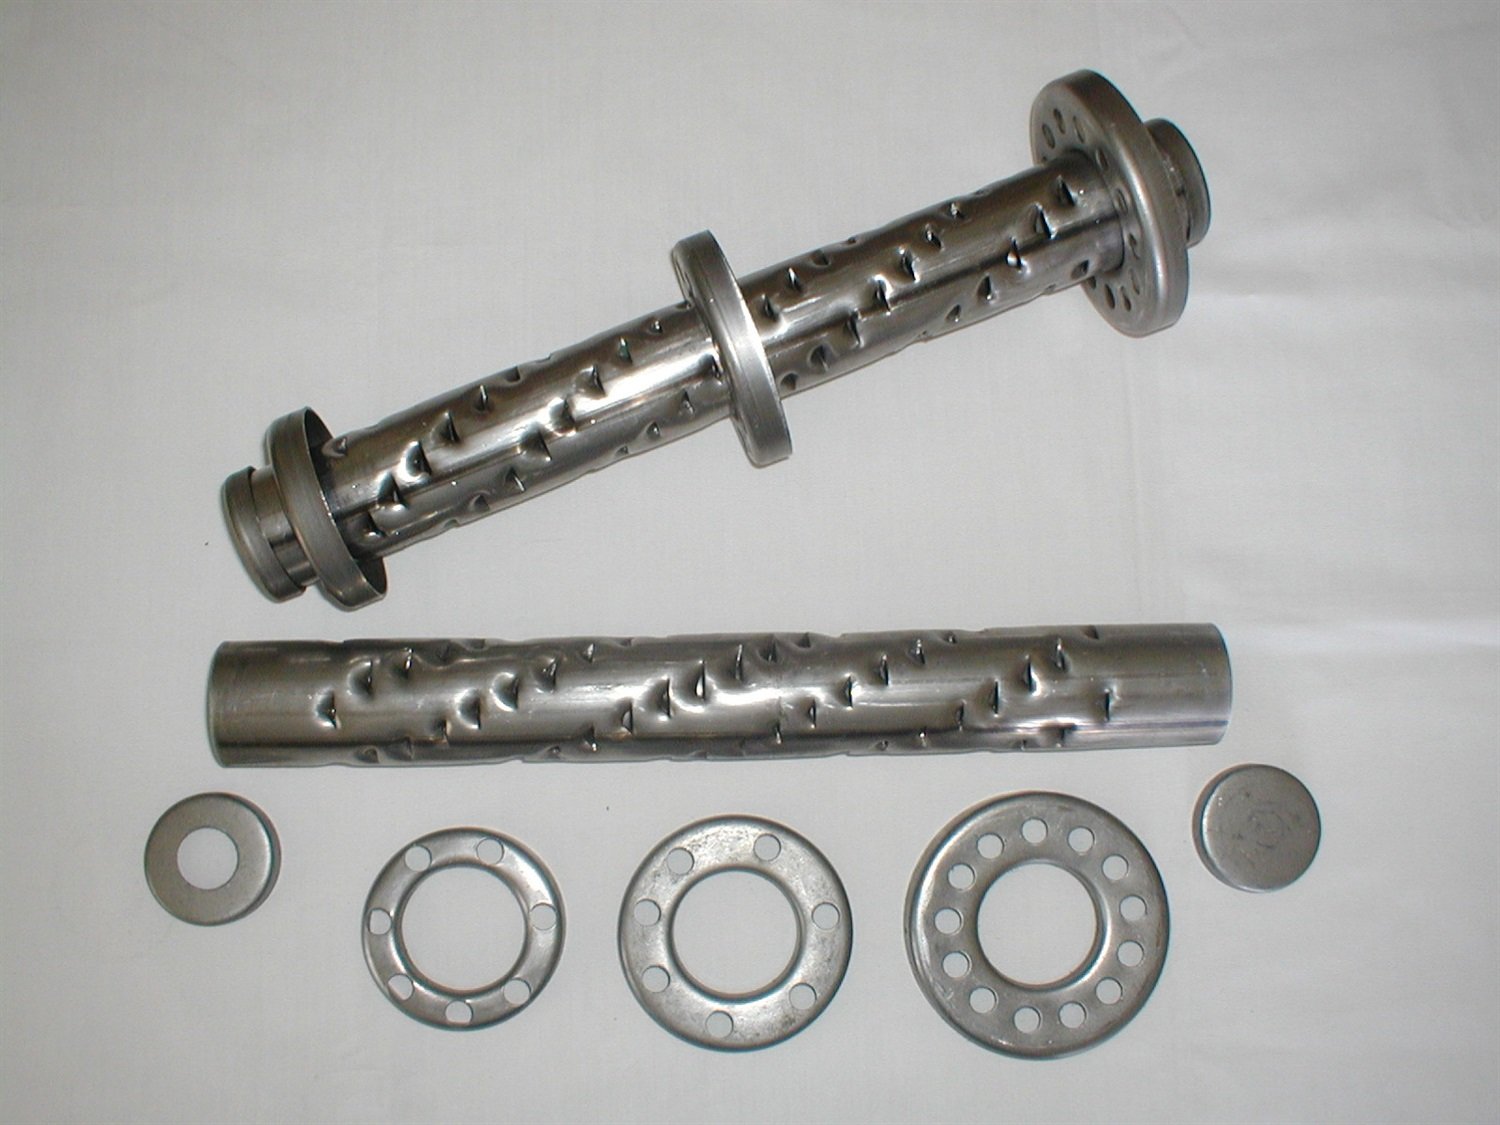 Lake Style Header Muffler Kit w/Round Flange Incl. 3 in./3.5 in./4 in. Disks/Central Tube/Plug/Restrictor Requires Welding